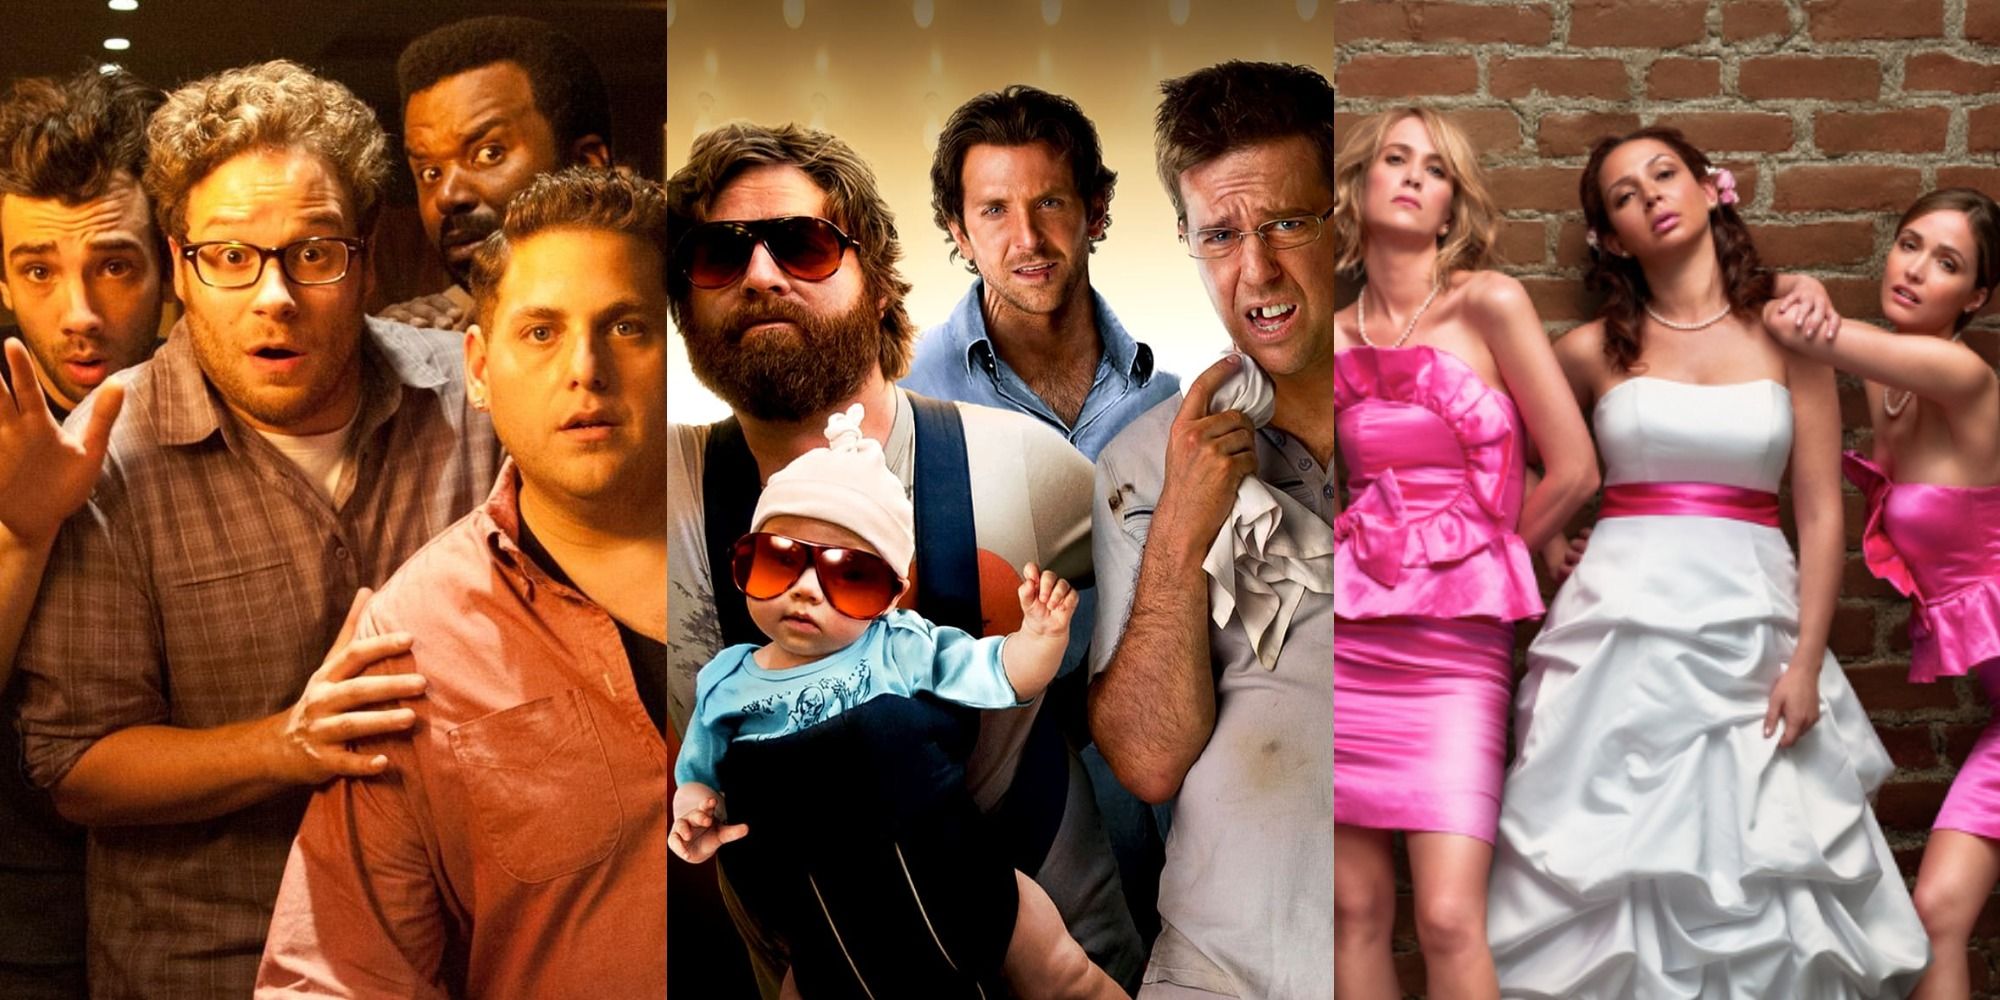 Split image of the main characters from This Is the End, The Hangover and Bridesmaids